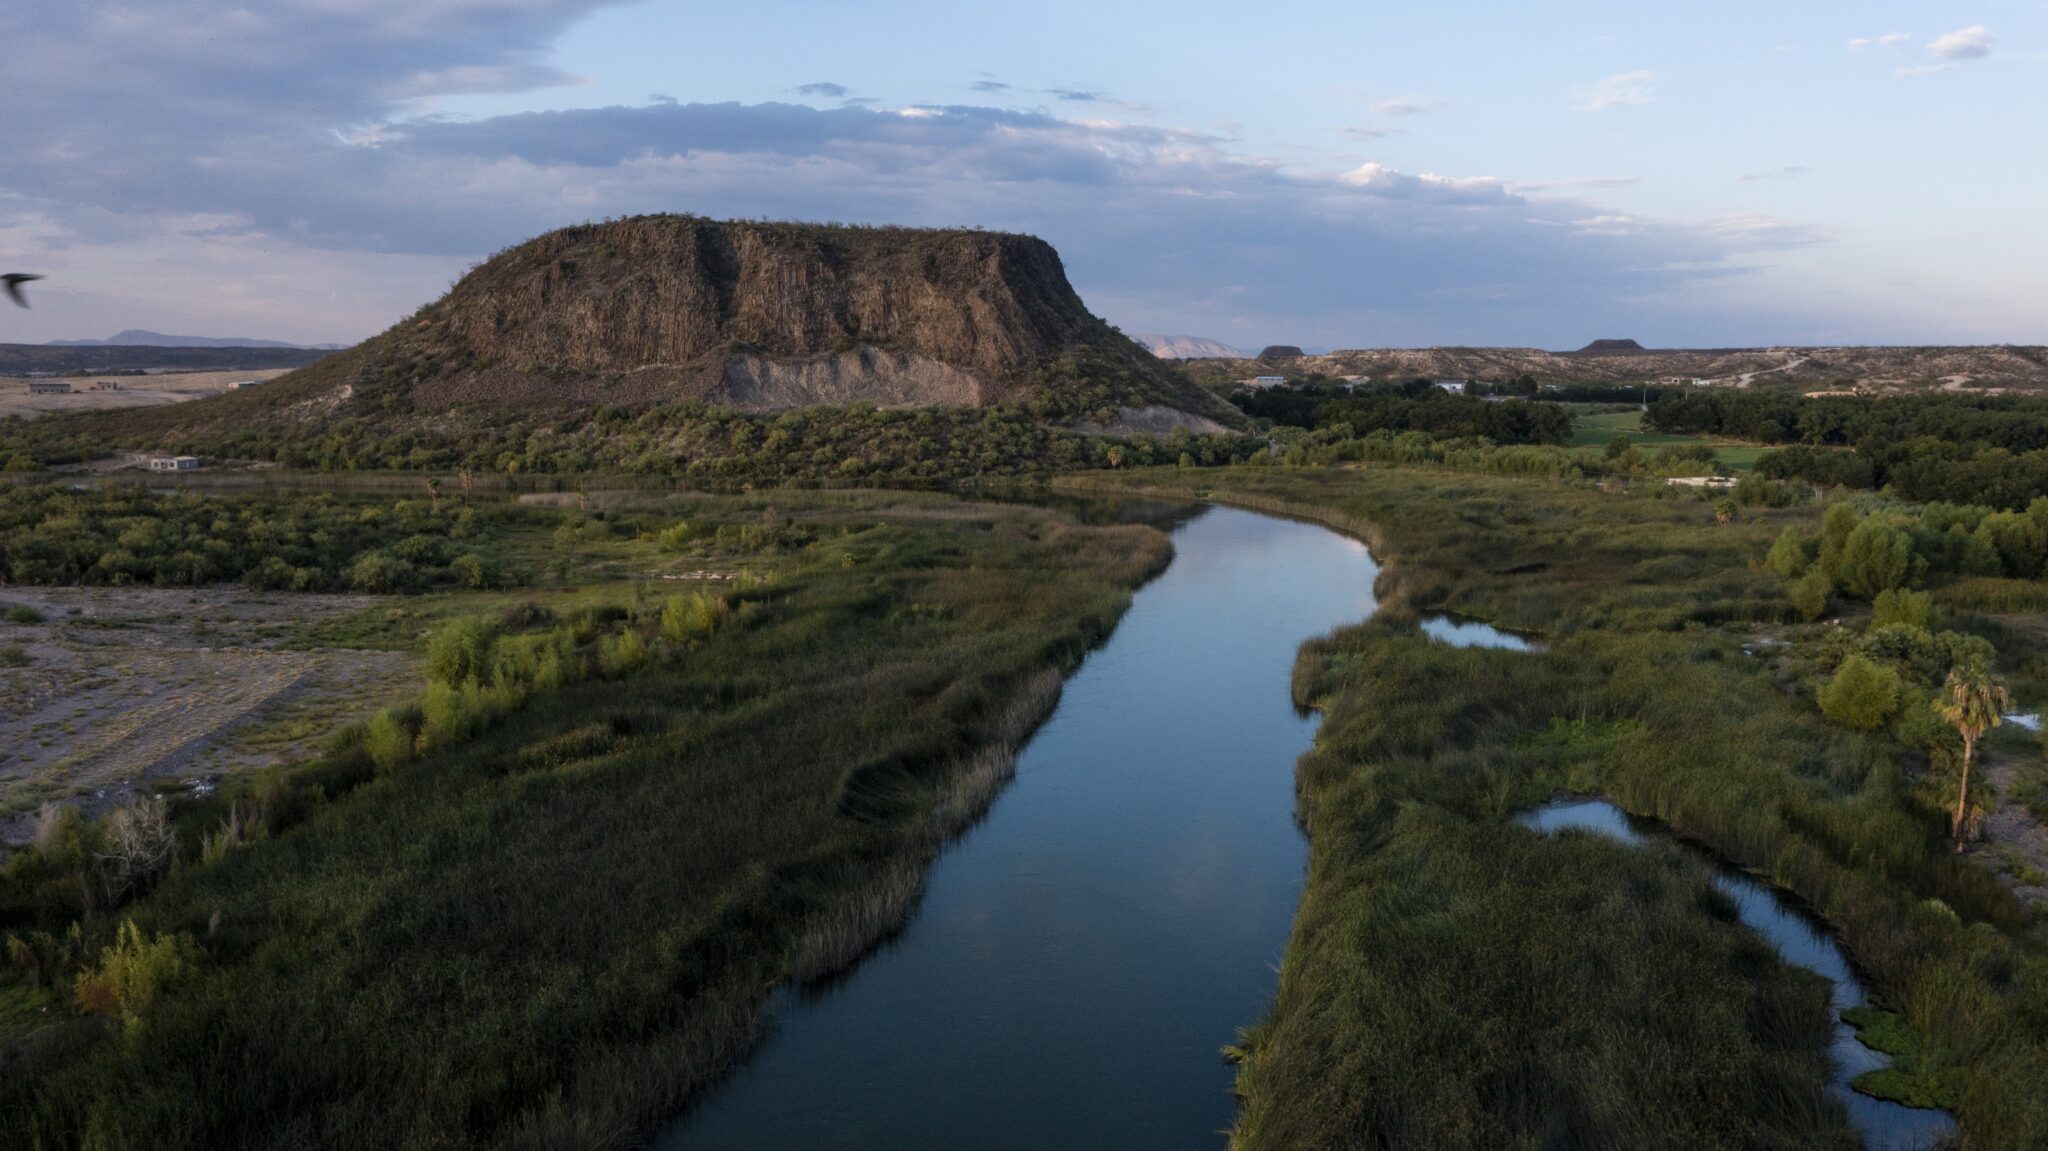 A river winds through a lush looking desert landscape, past a lone mountain.